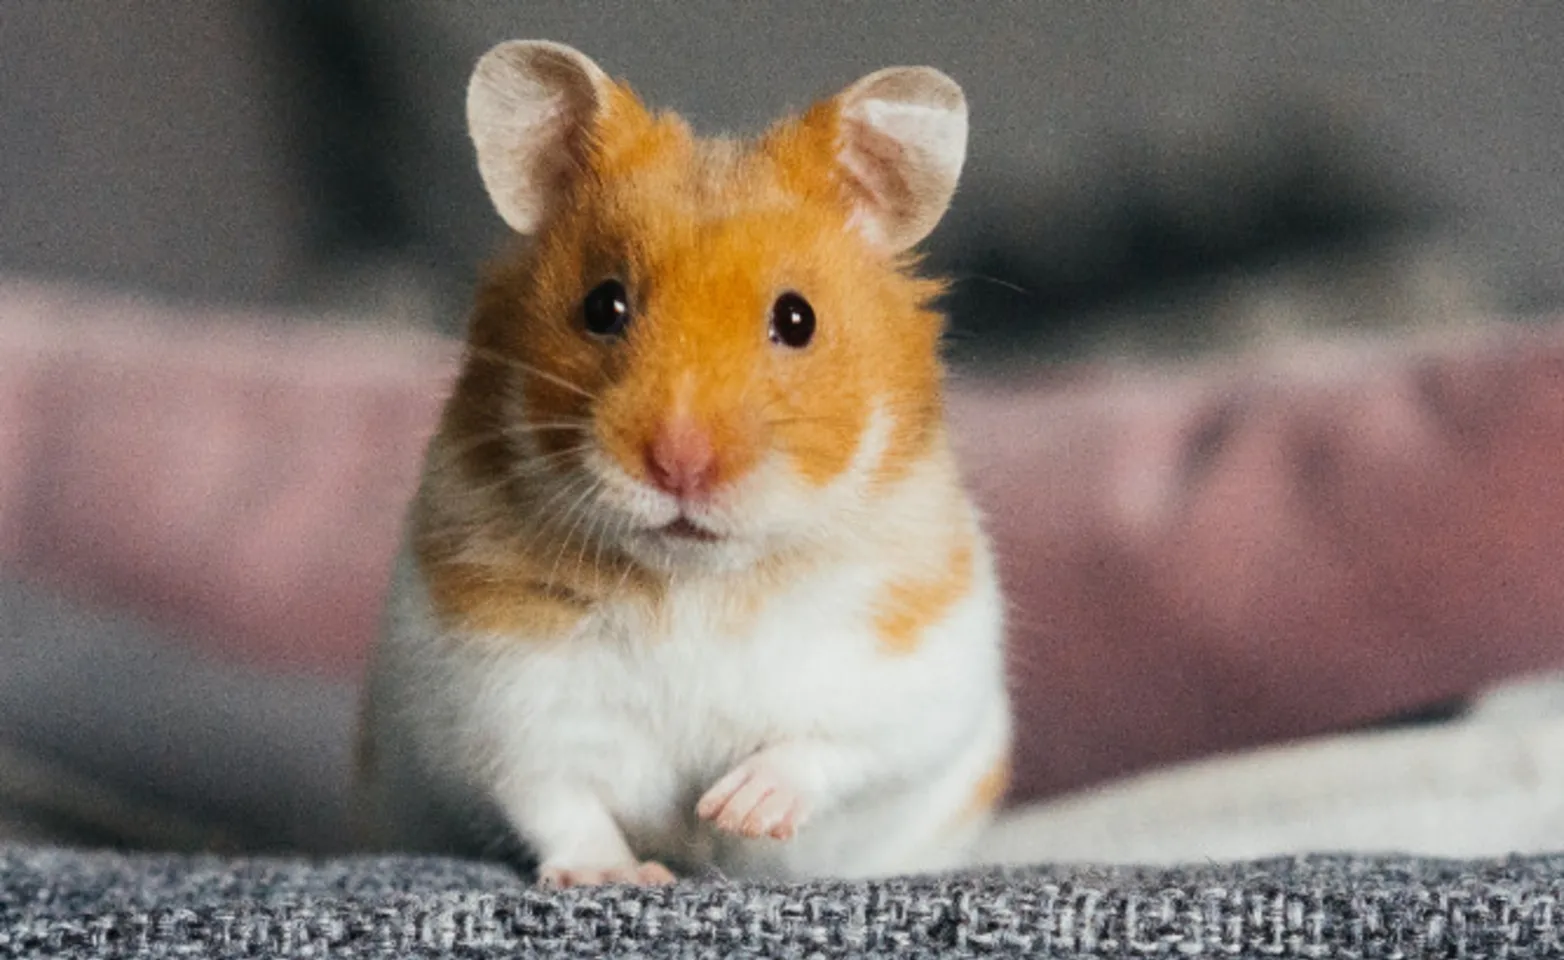 Orange Hamster Sitting on Couch